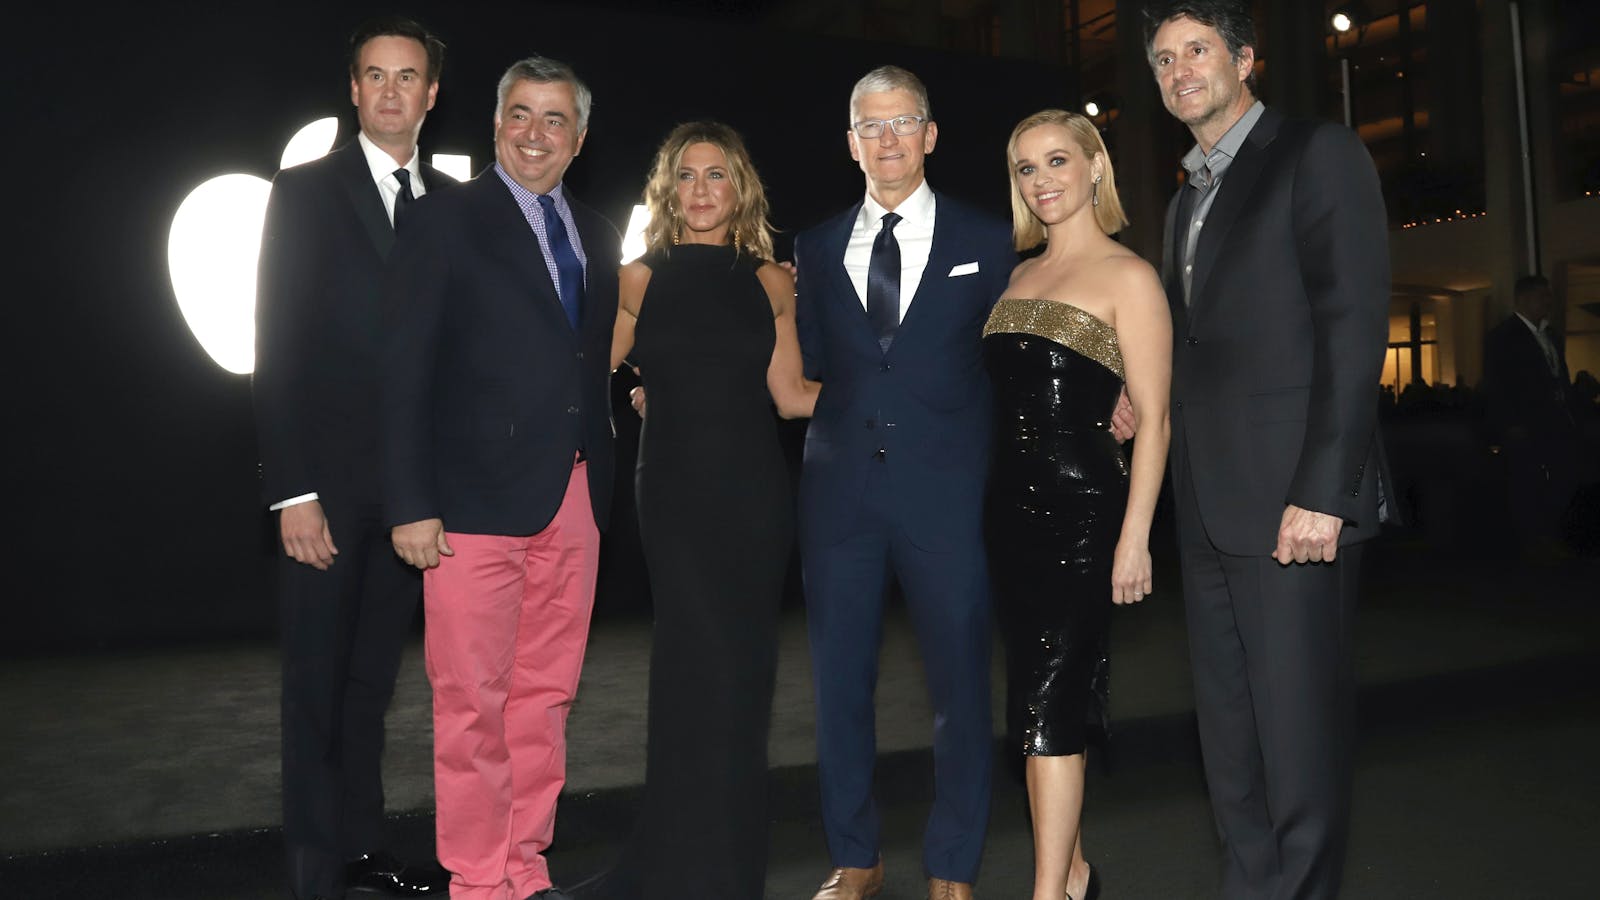 Apple's Zack Van Amburg, Eddy Cue (in red pants) with Jennifer Aniston, Apple CEO Tim Cook, Reese Witherspoon and Apple's Jamie Erlicht
at the "The Morning Show" premiere in New York. Photo by AP